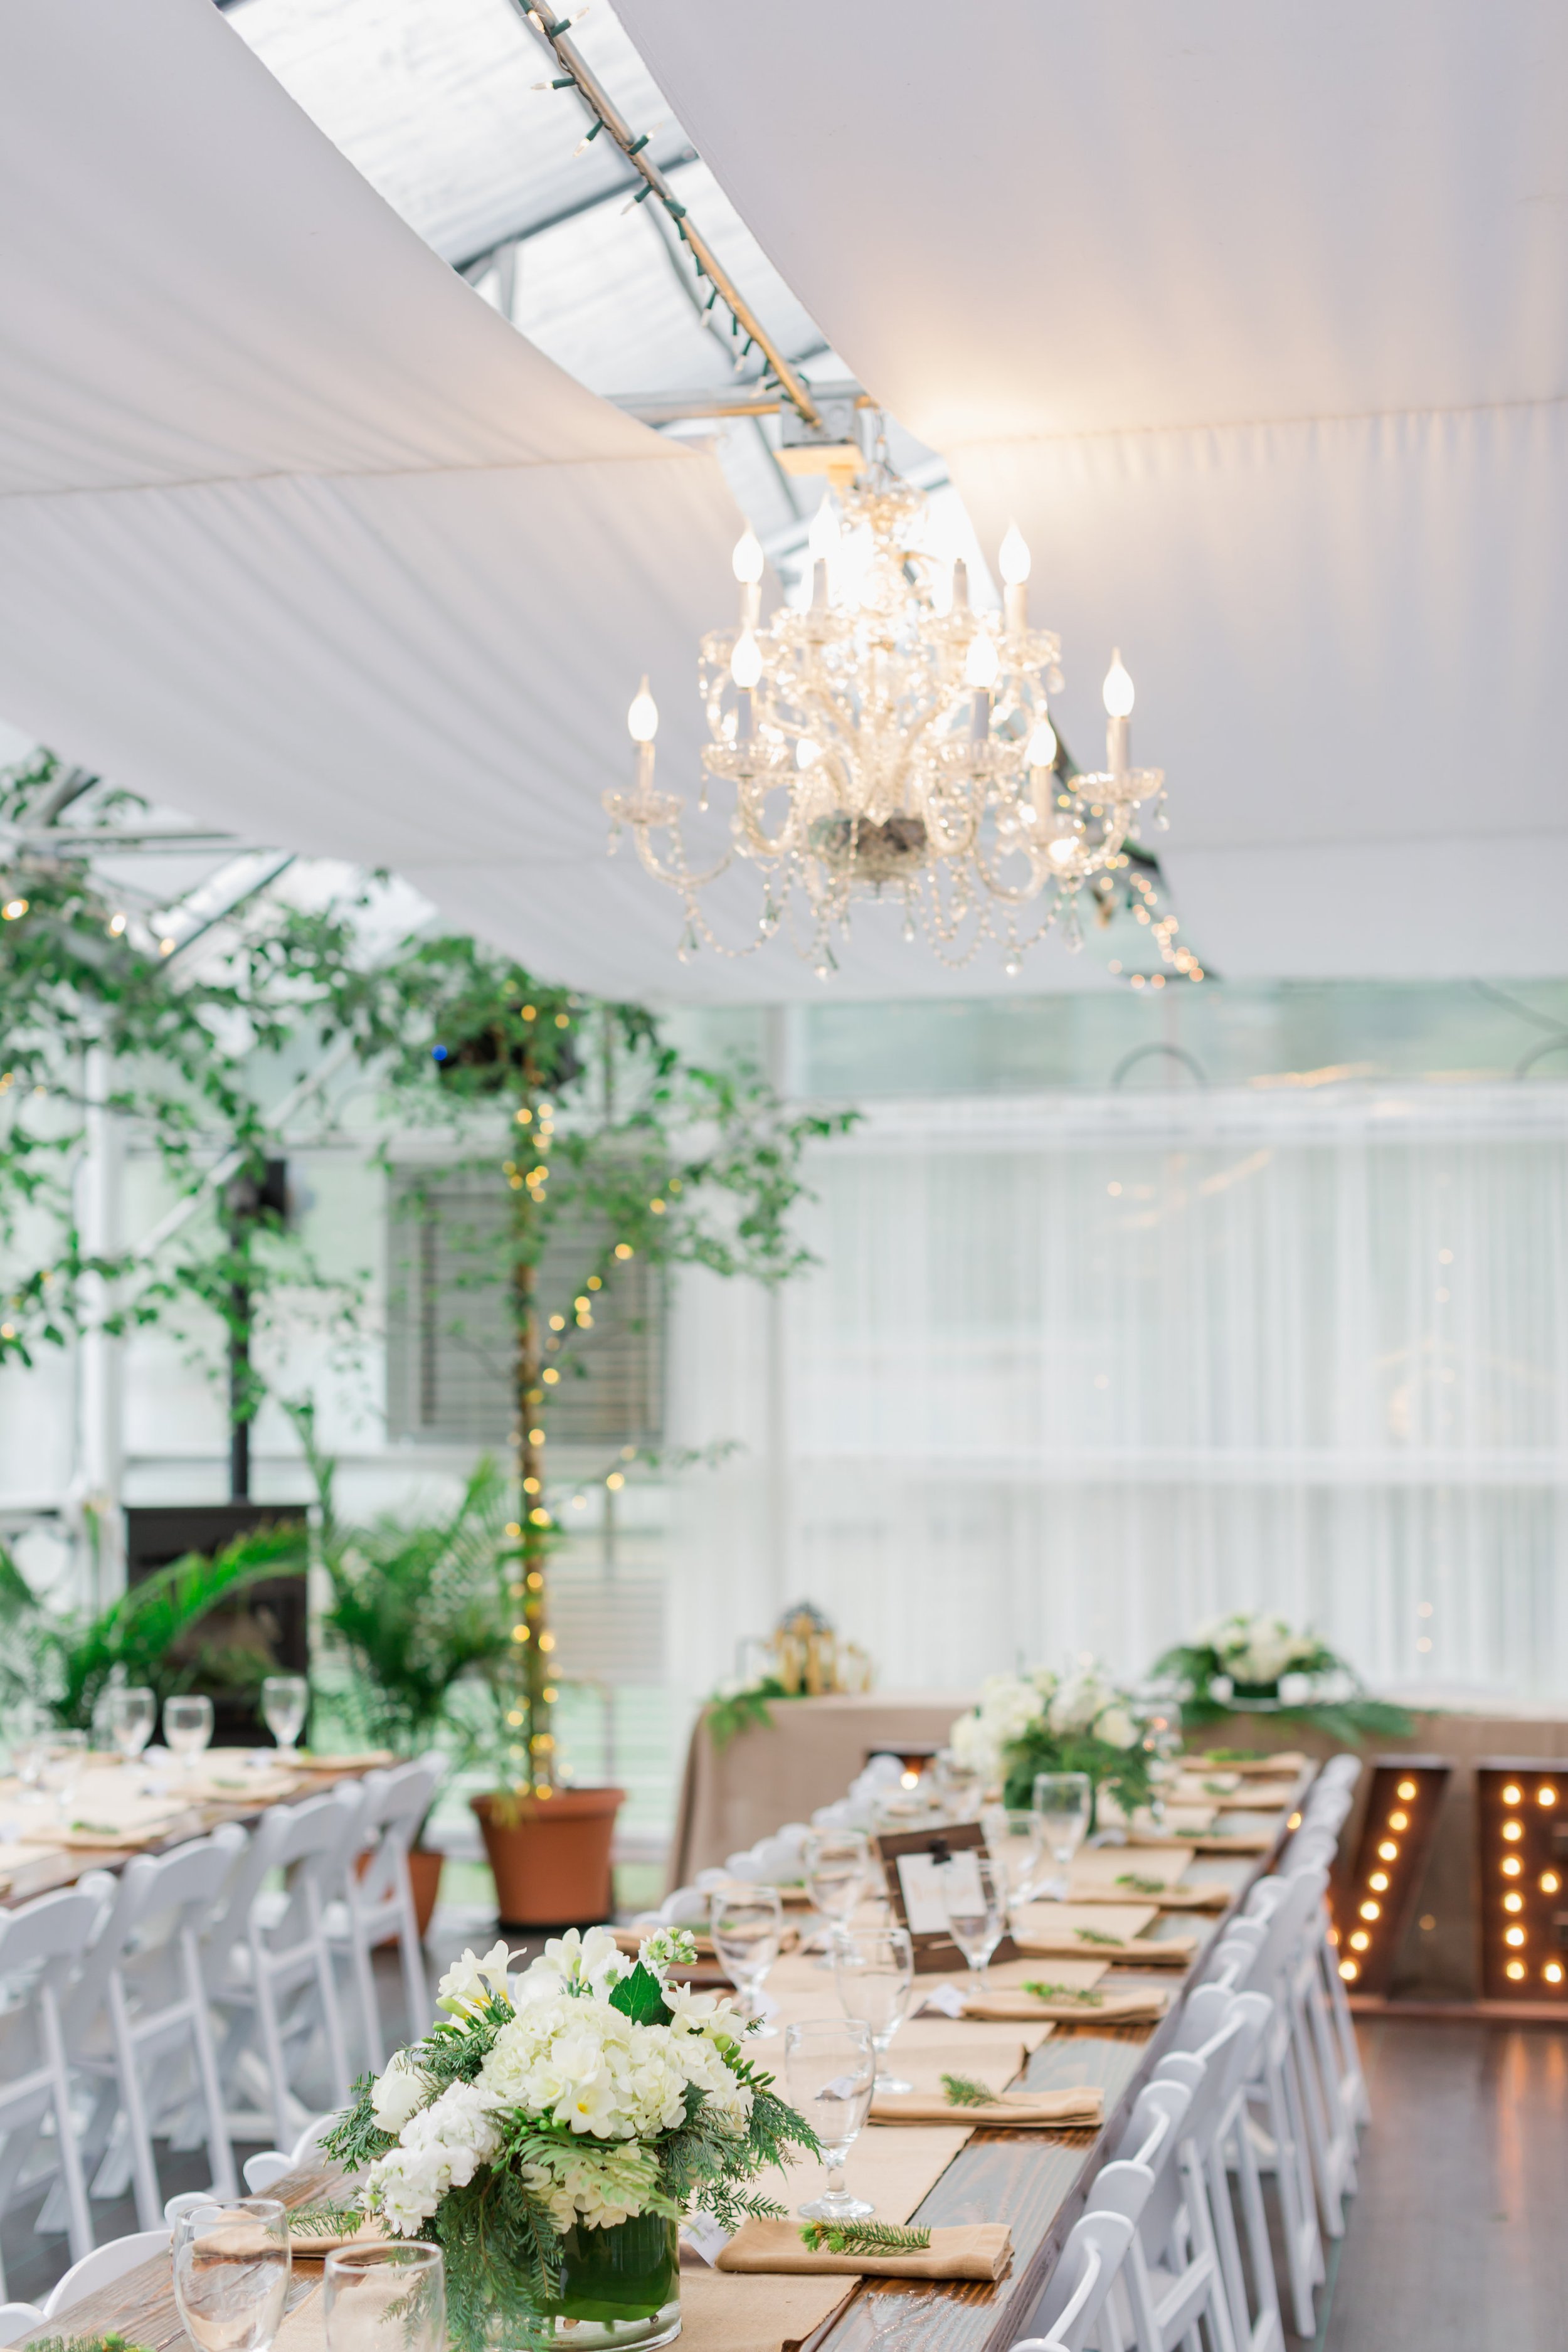  A table is set for a wedding reception in a green house. White fabric is draping the walls and ceiling. 